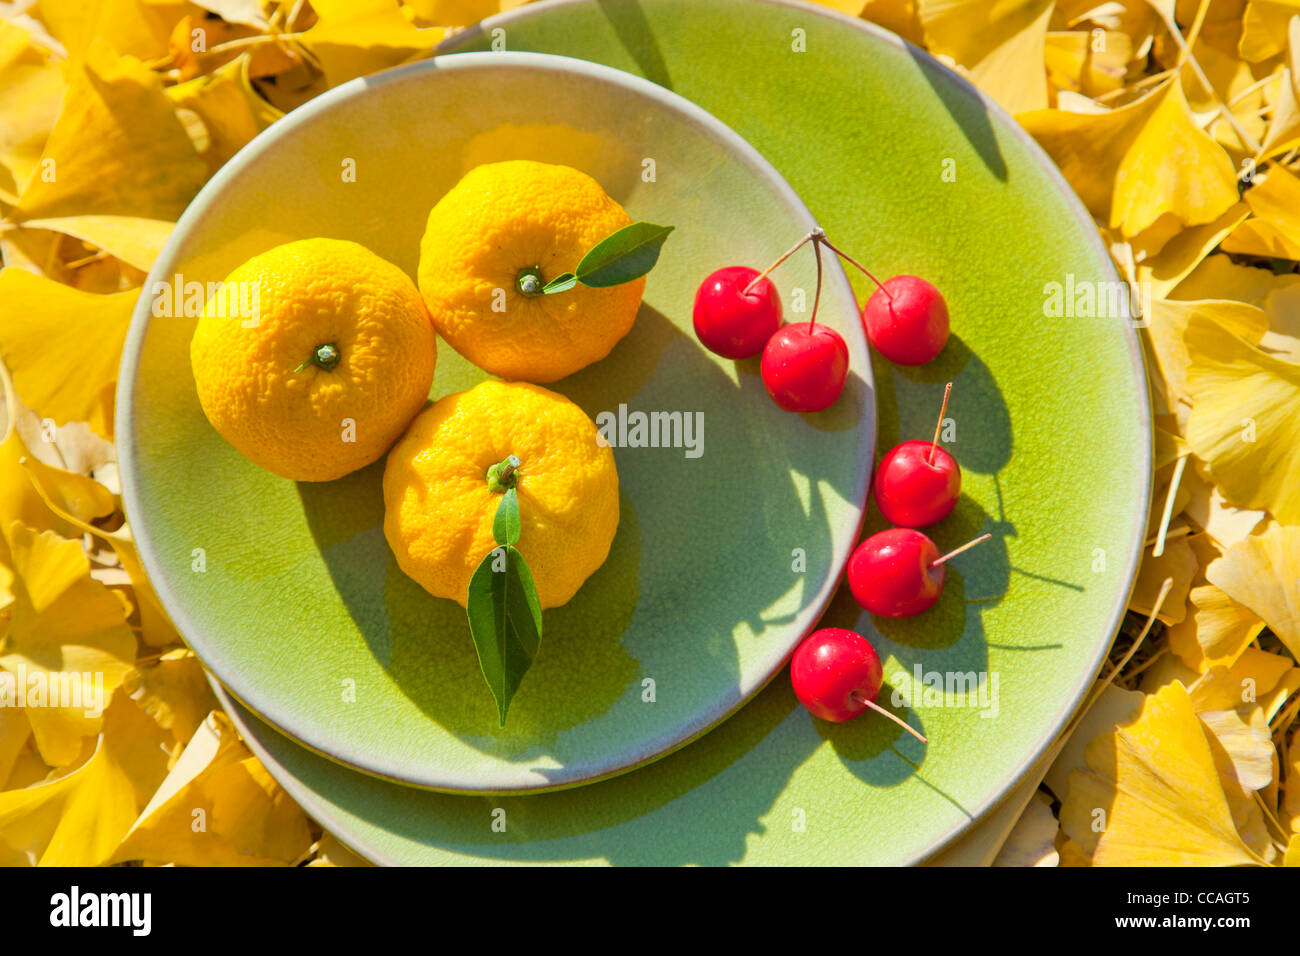 Fruits in Bowl Stock Photo